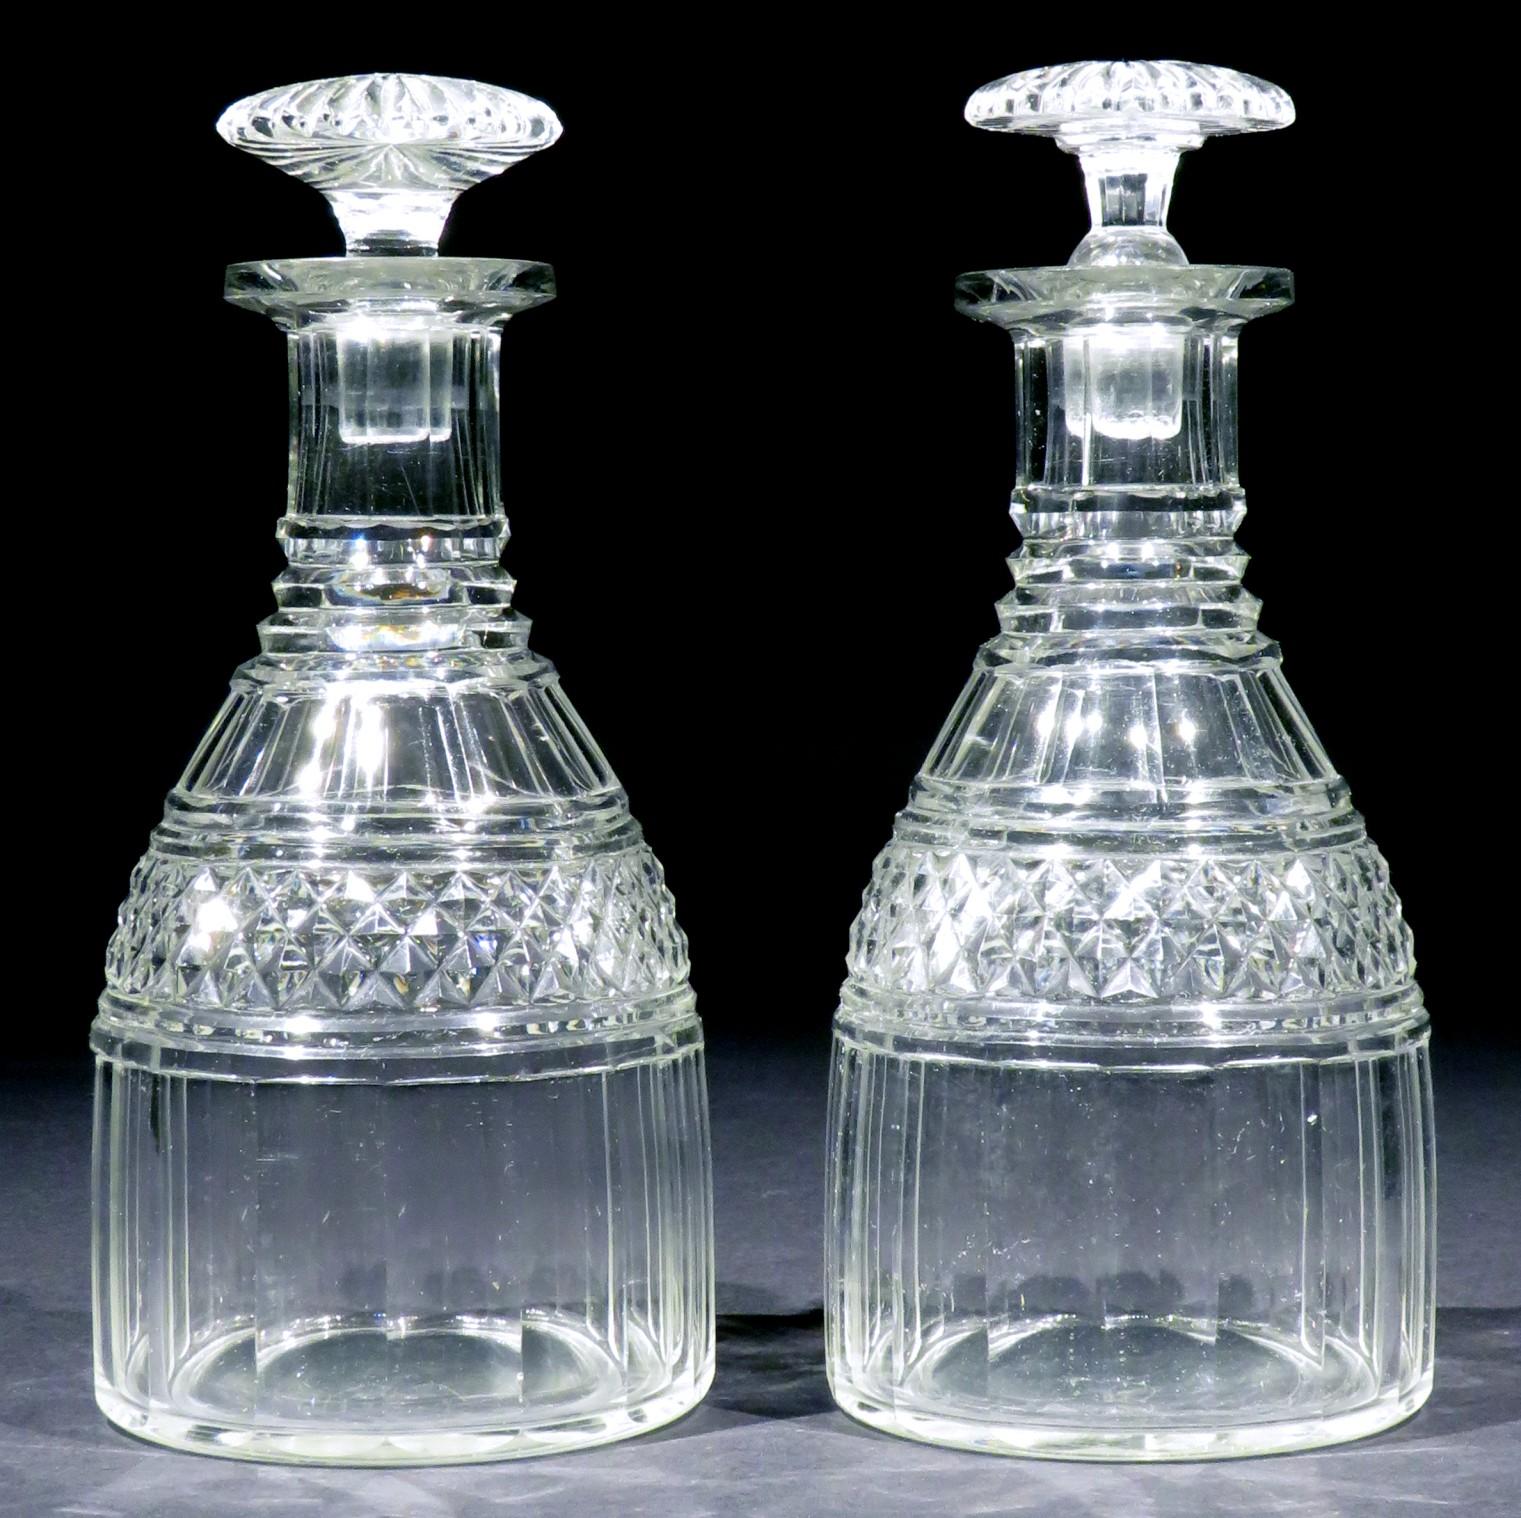 A very handsome pair of Regency Period mallet shaped cut glass decanters. 
Both showing bases decorated with basal flutes & diamond cut bands, rising to tapering necks decorated with three annulated neck rings & basal cut flutes, to broad mouths